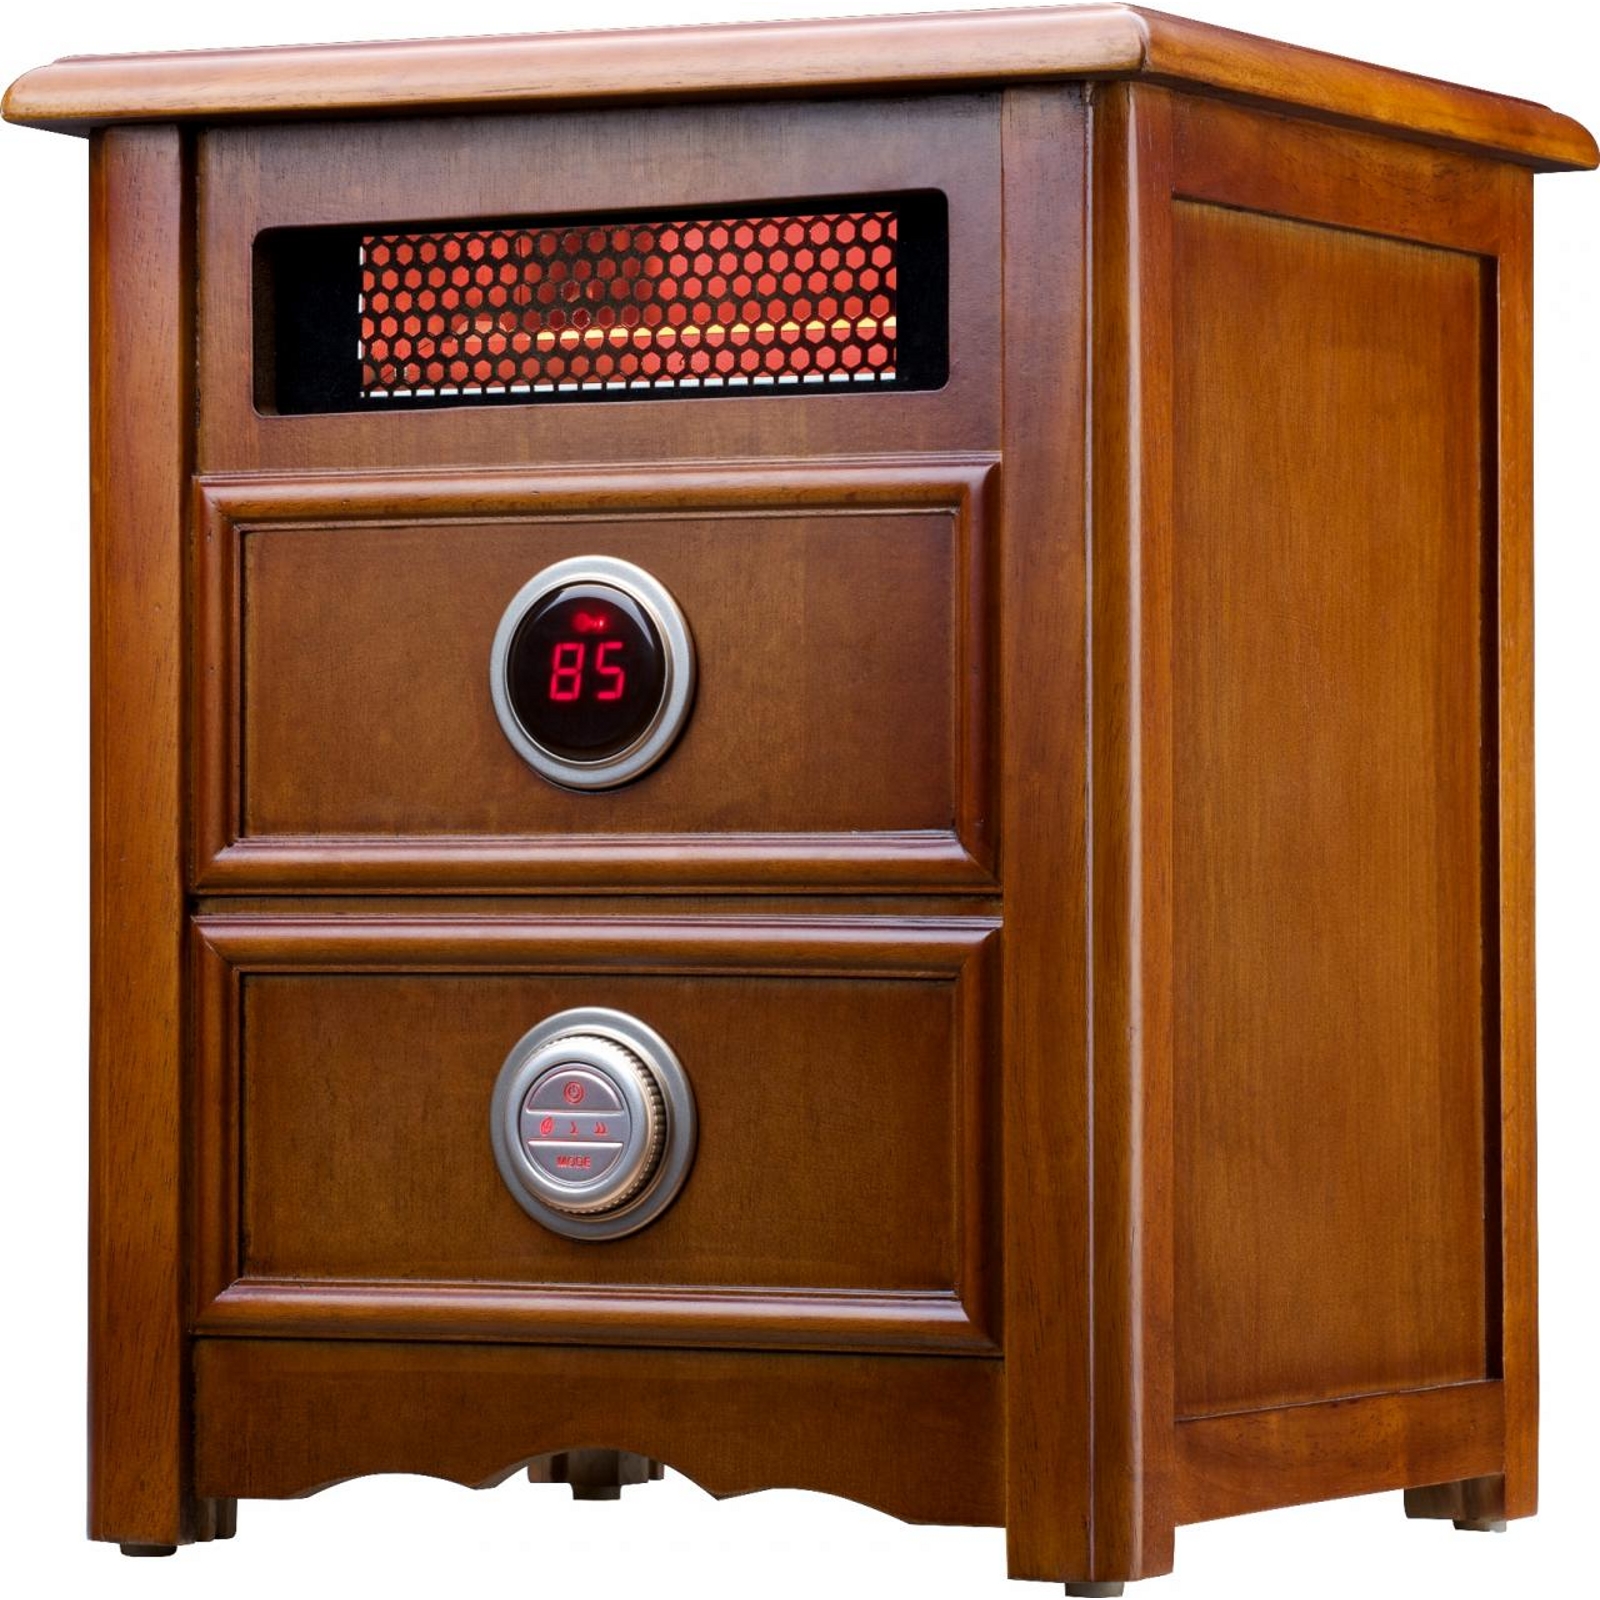 Dr. Infrared Heater DR999 , 1500W, Advanced Dual Heating System with Nightstand Design, Furniture-Grade Cabinet, Remote Control